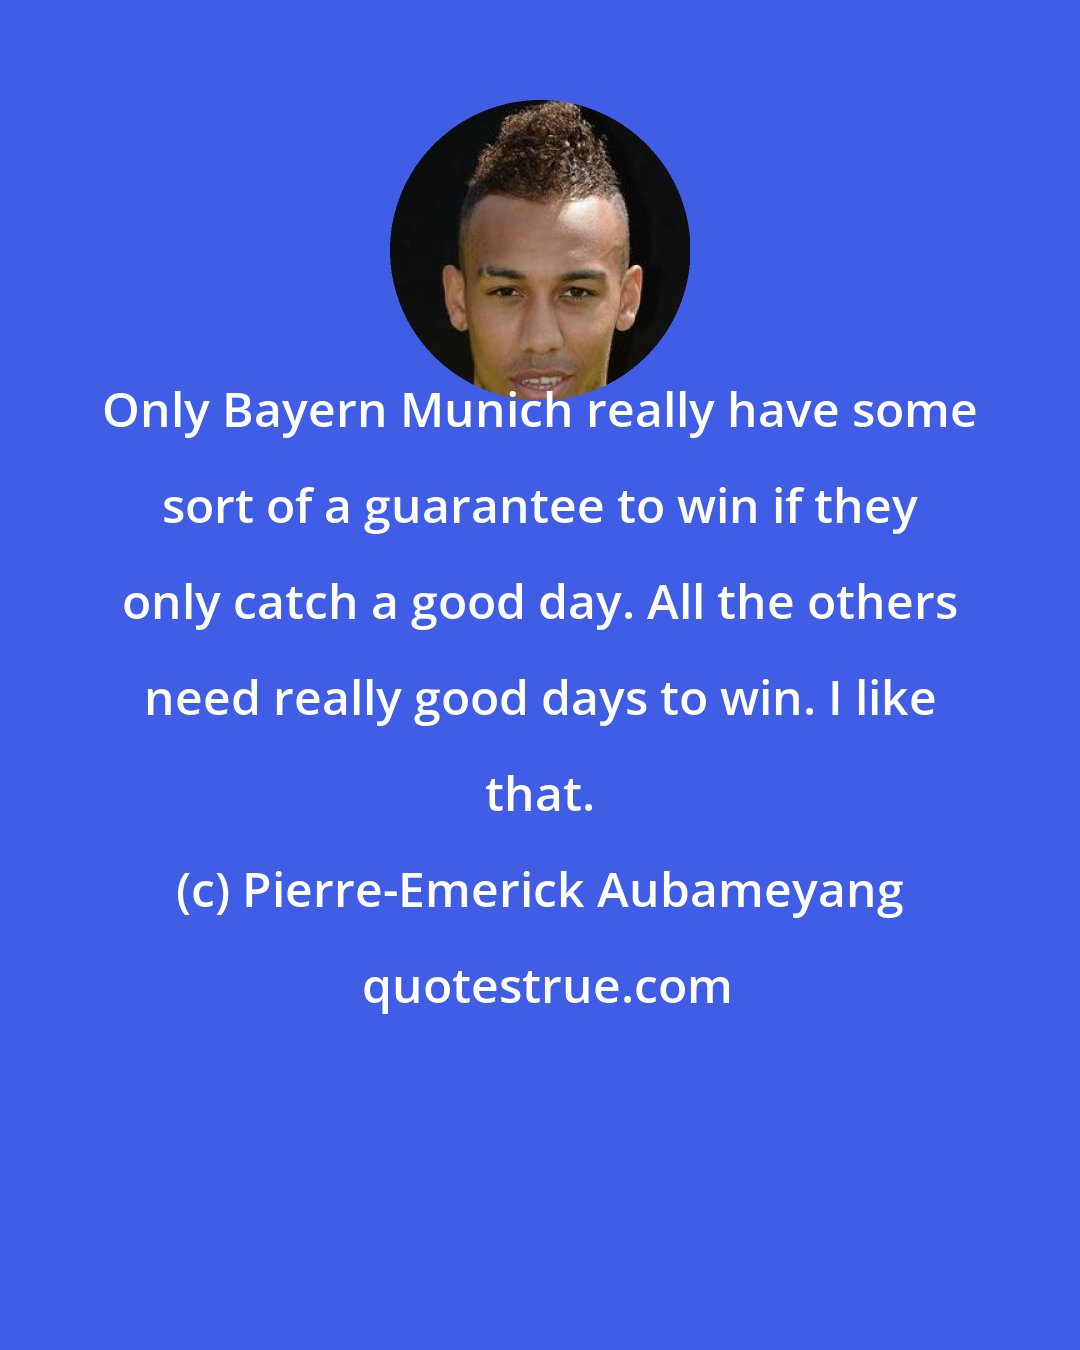 Pierre-Emerick Aubameyang: Only Bayern Munich really have some sort of a guarantee to win if they only catch a good day. All the others need really good days to win. I like that.